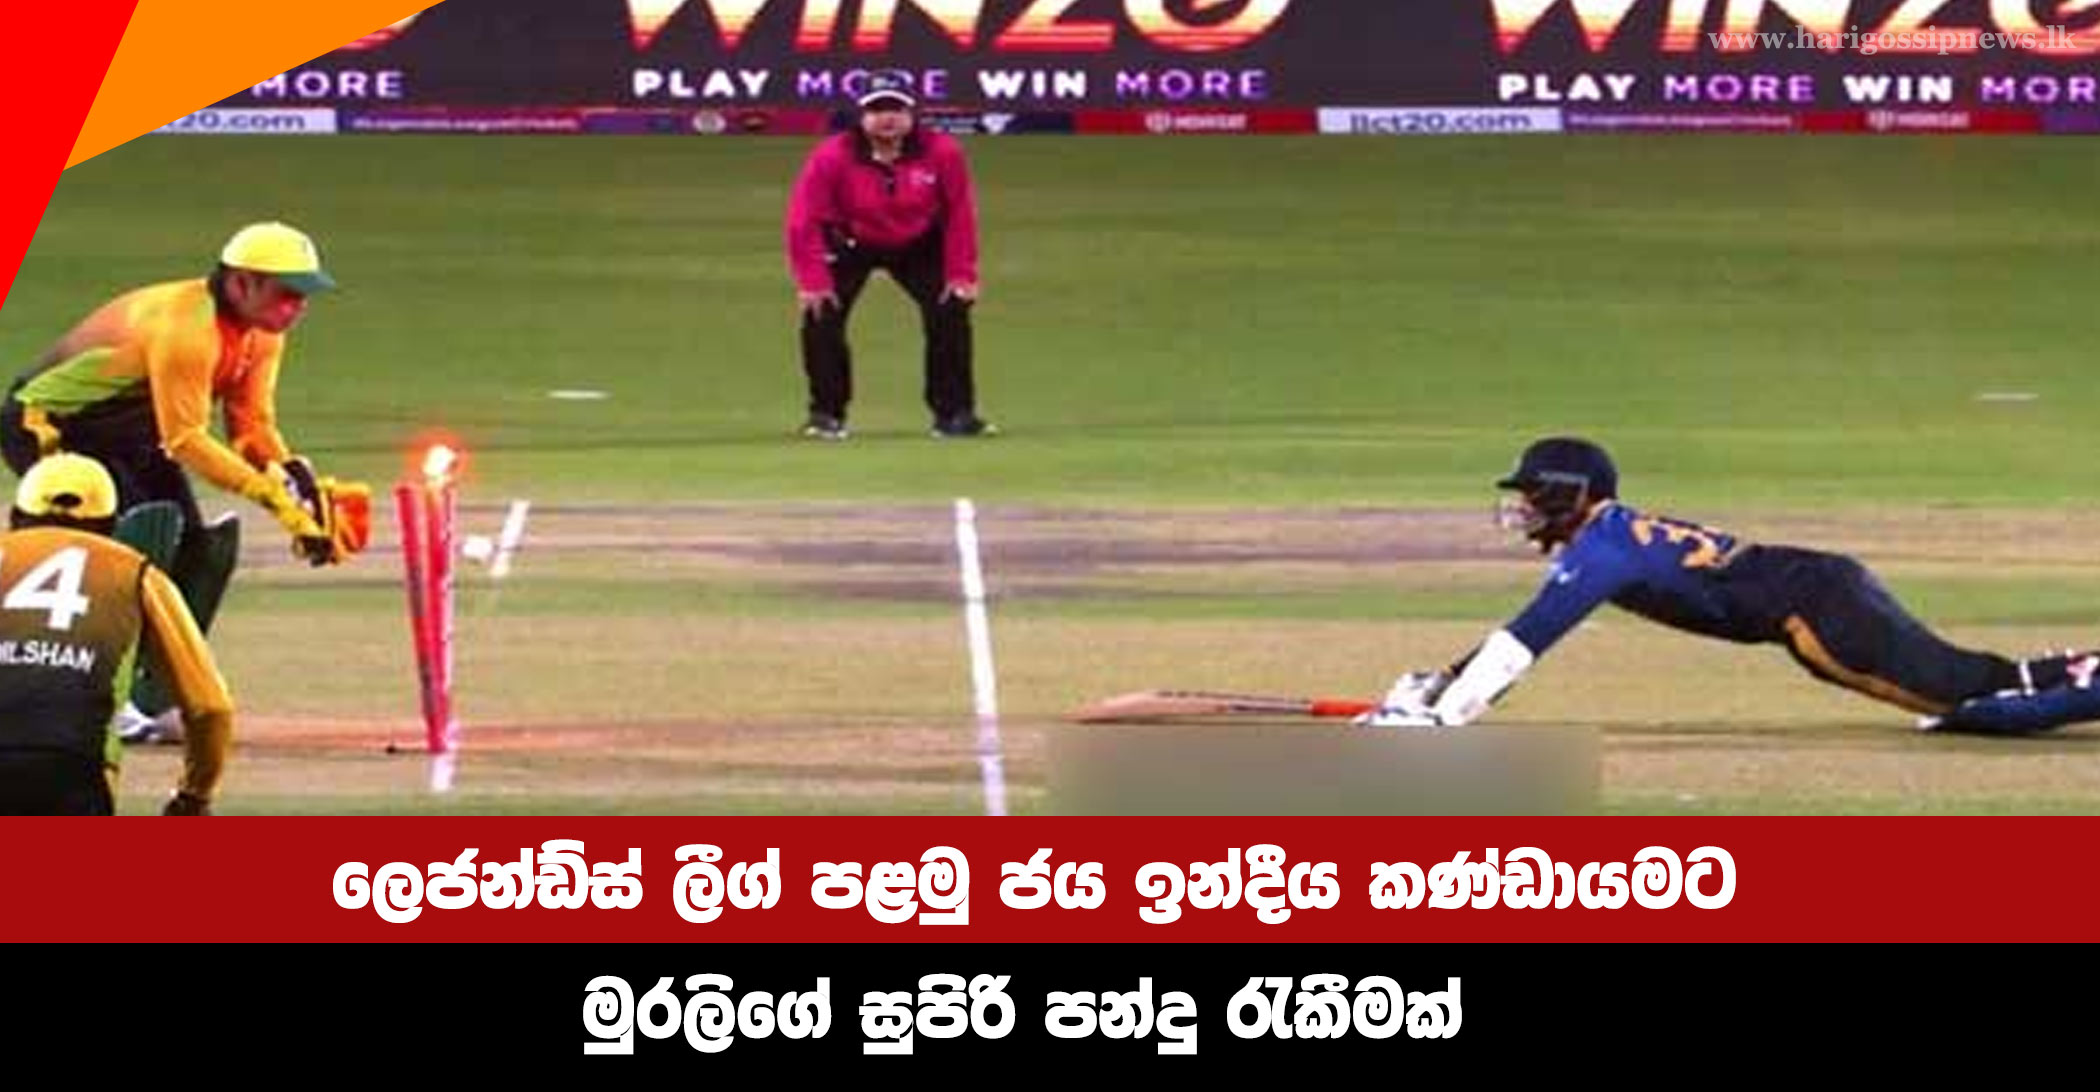 Legends League first win for India - Murali's superb save